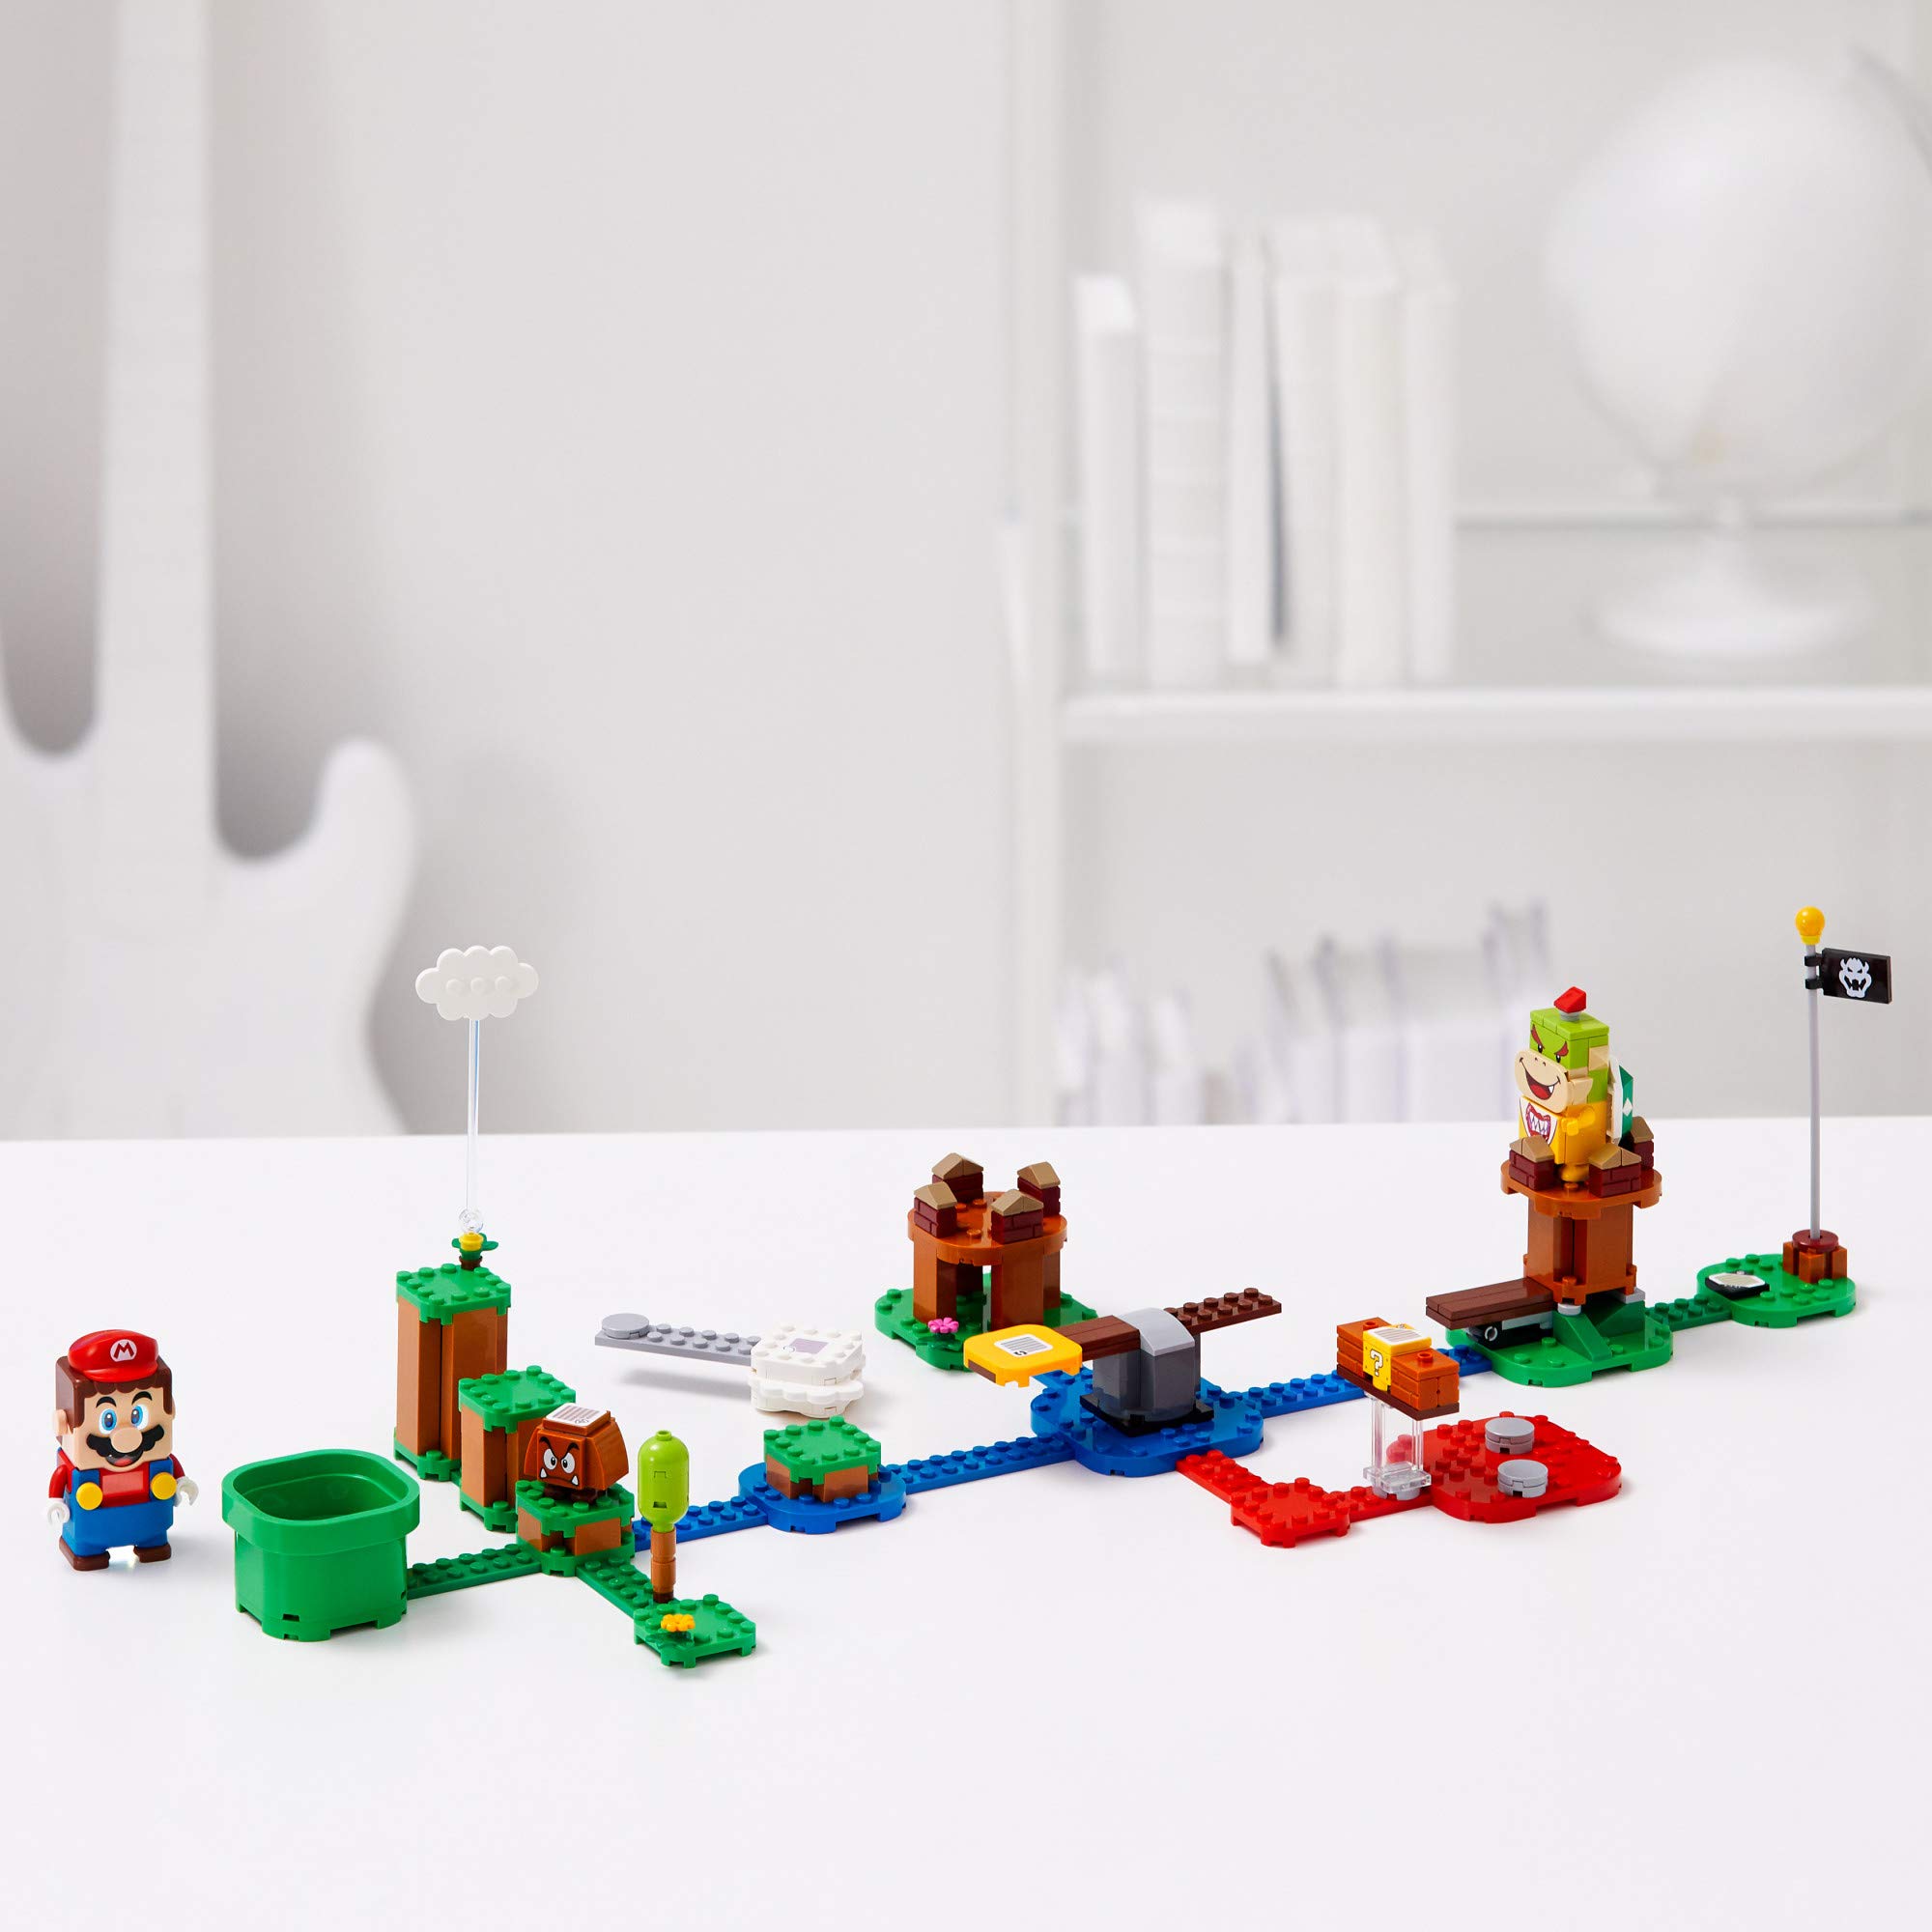 LEGO Super Mario Adventures Starter Course Set 71360, Buildable Toy Game, Birthday Gift for Super Mario Bros. Fans and Kids 6 Plus Year Old with Interactive Figure and Bowser Jr.